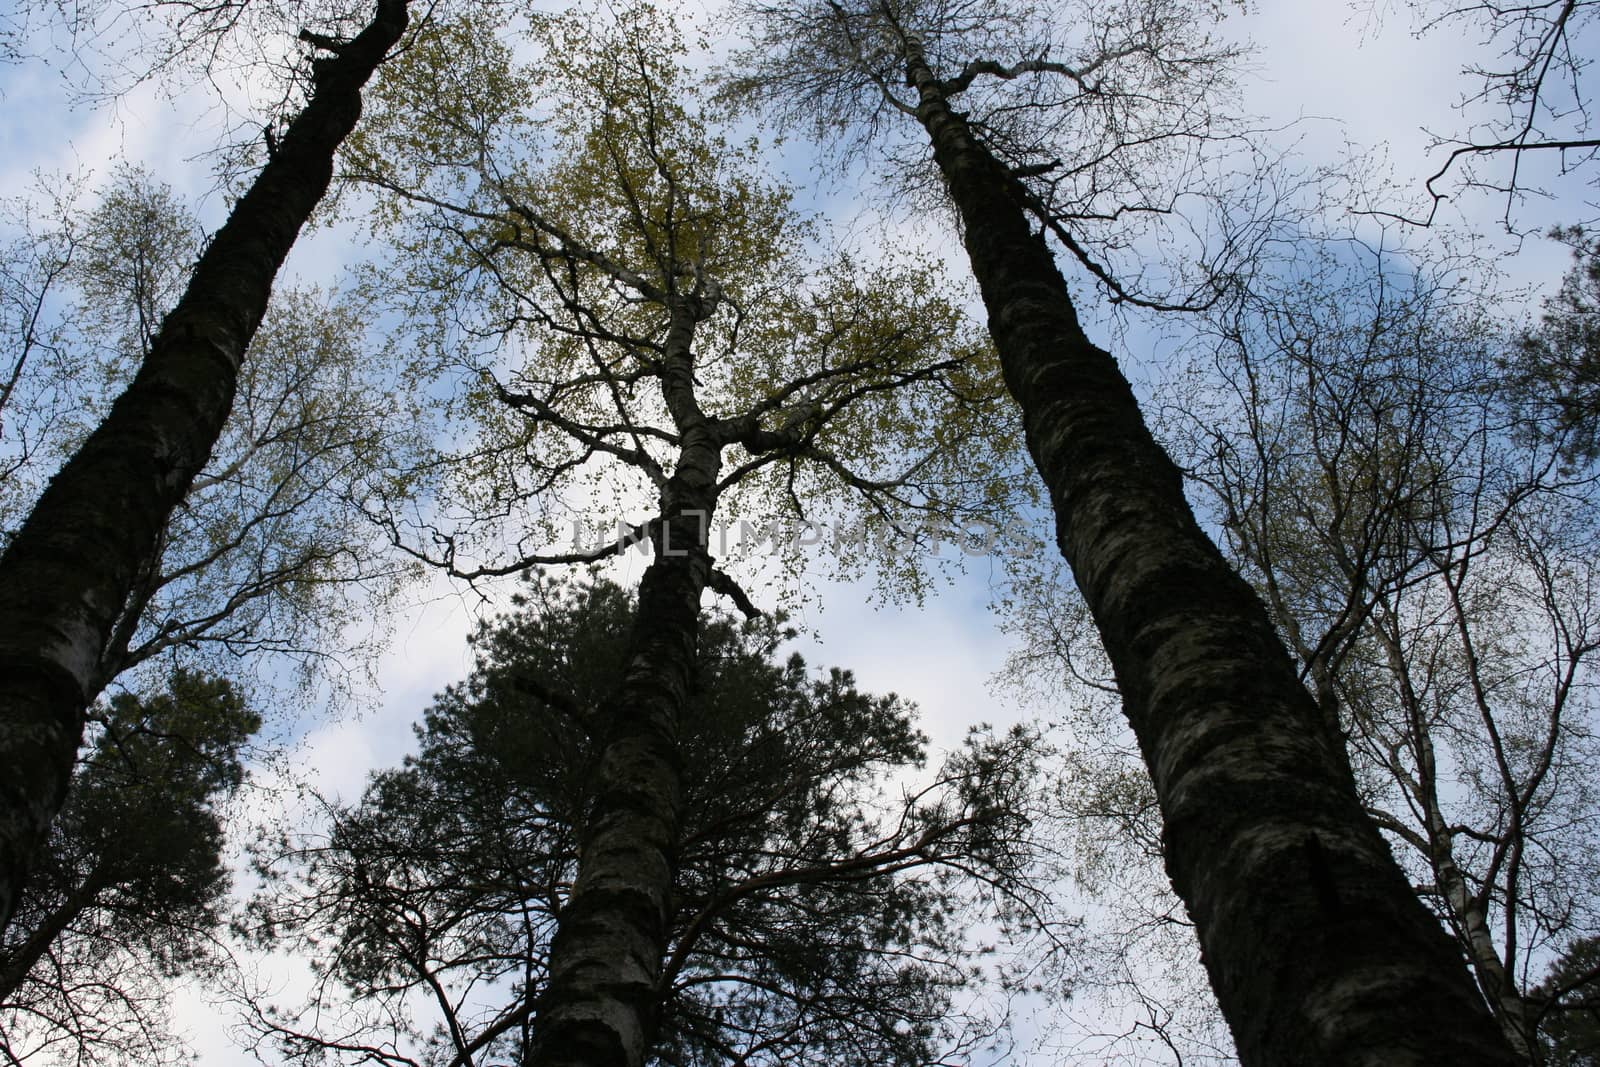 Trees from below